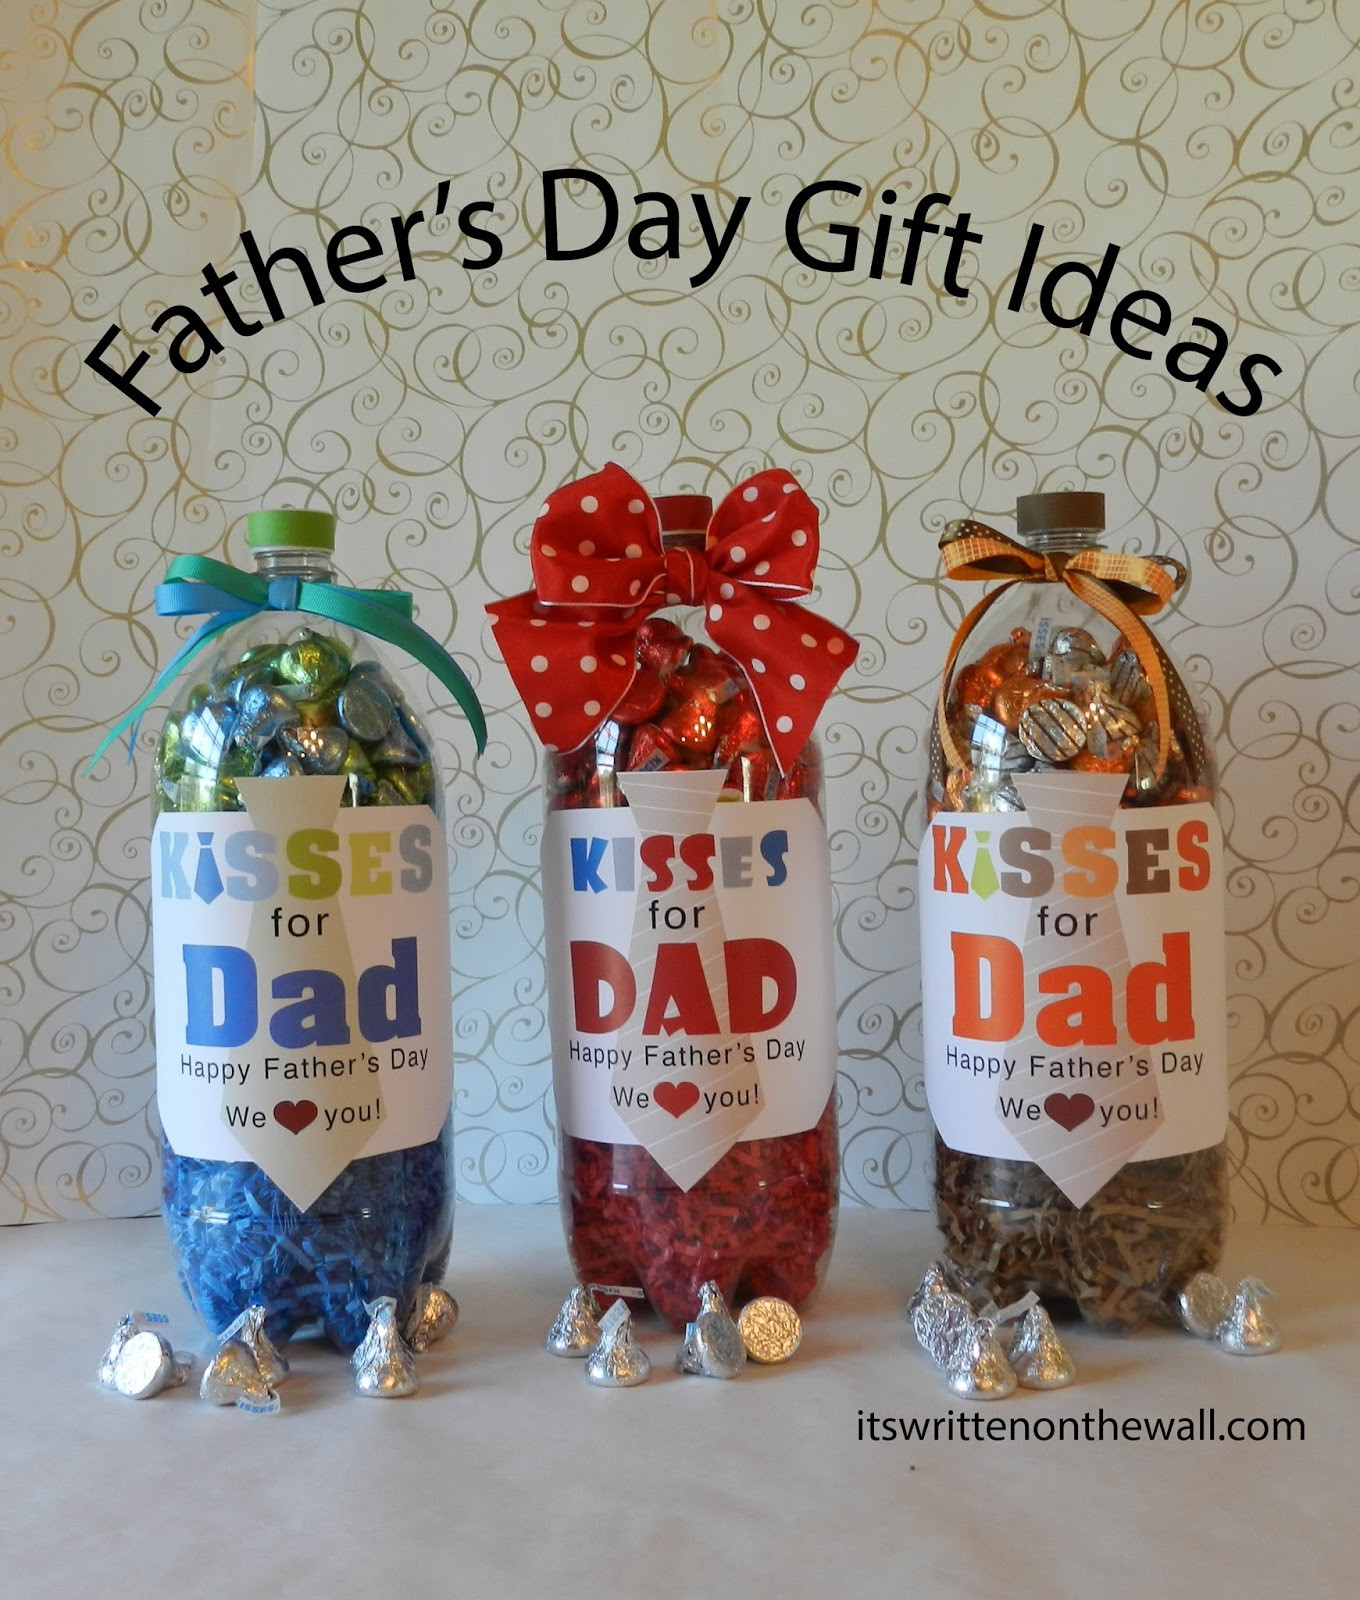 Fathers Day Gifts From Children
 It s Written on the Wall Fathers Day Gift Ideas For the